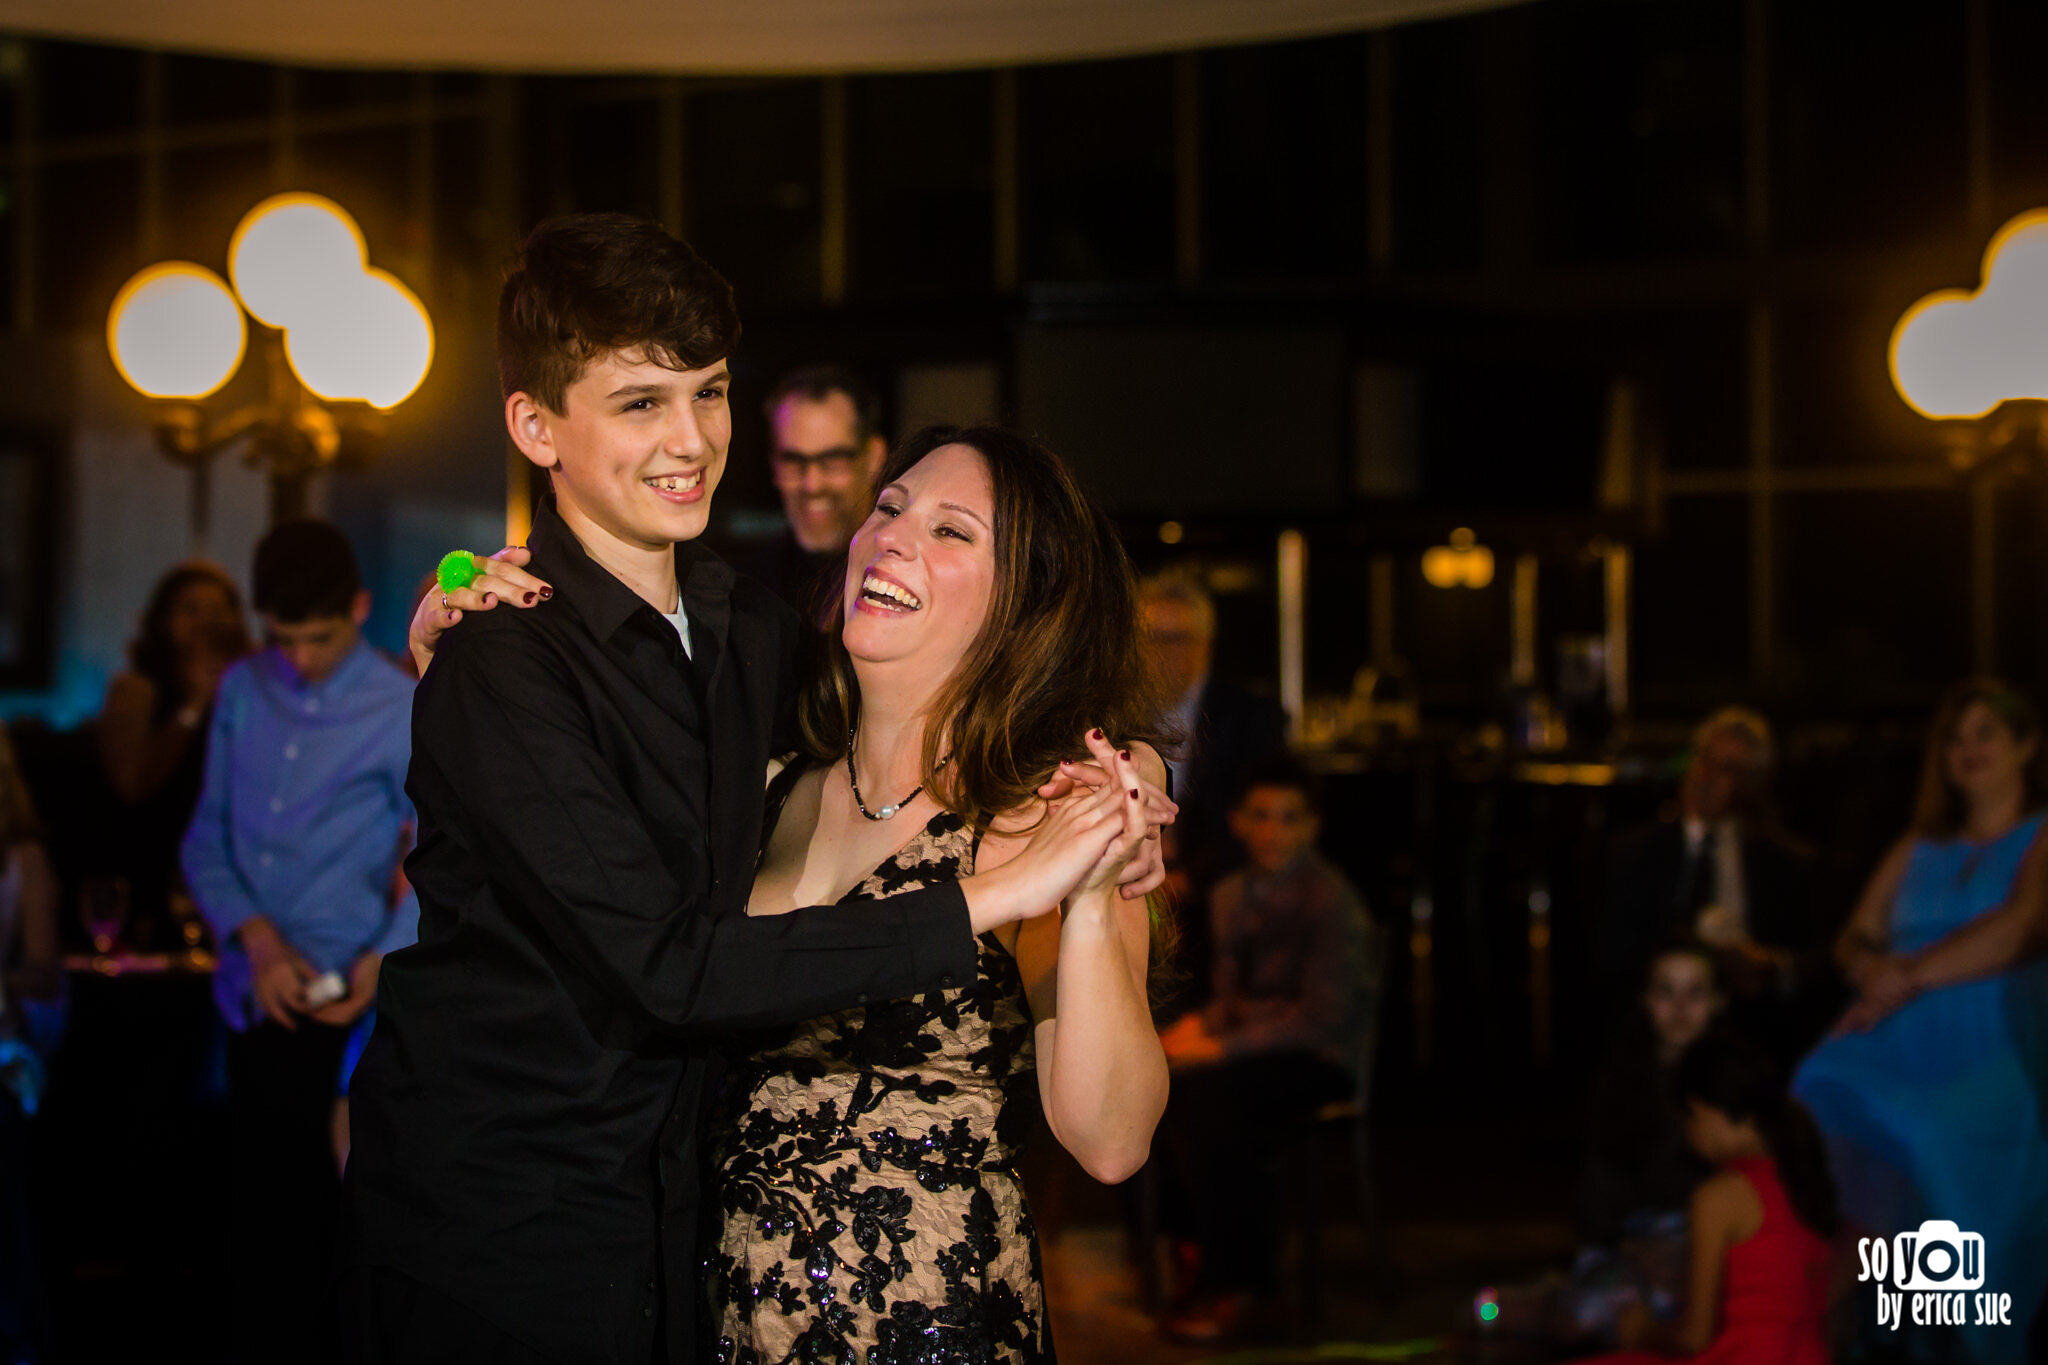 68-so-you-by-erica-sue-bar-mitzvah-photographer-boca-pavilion-grille-4160.JPG